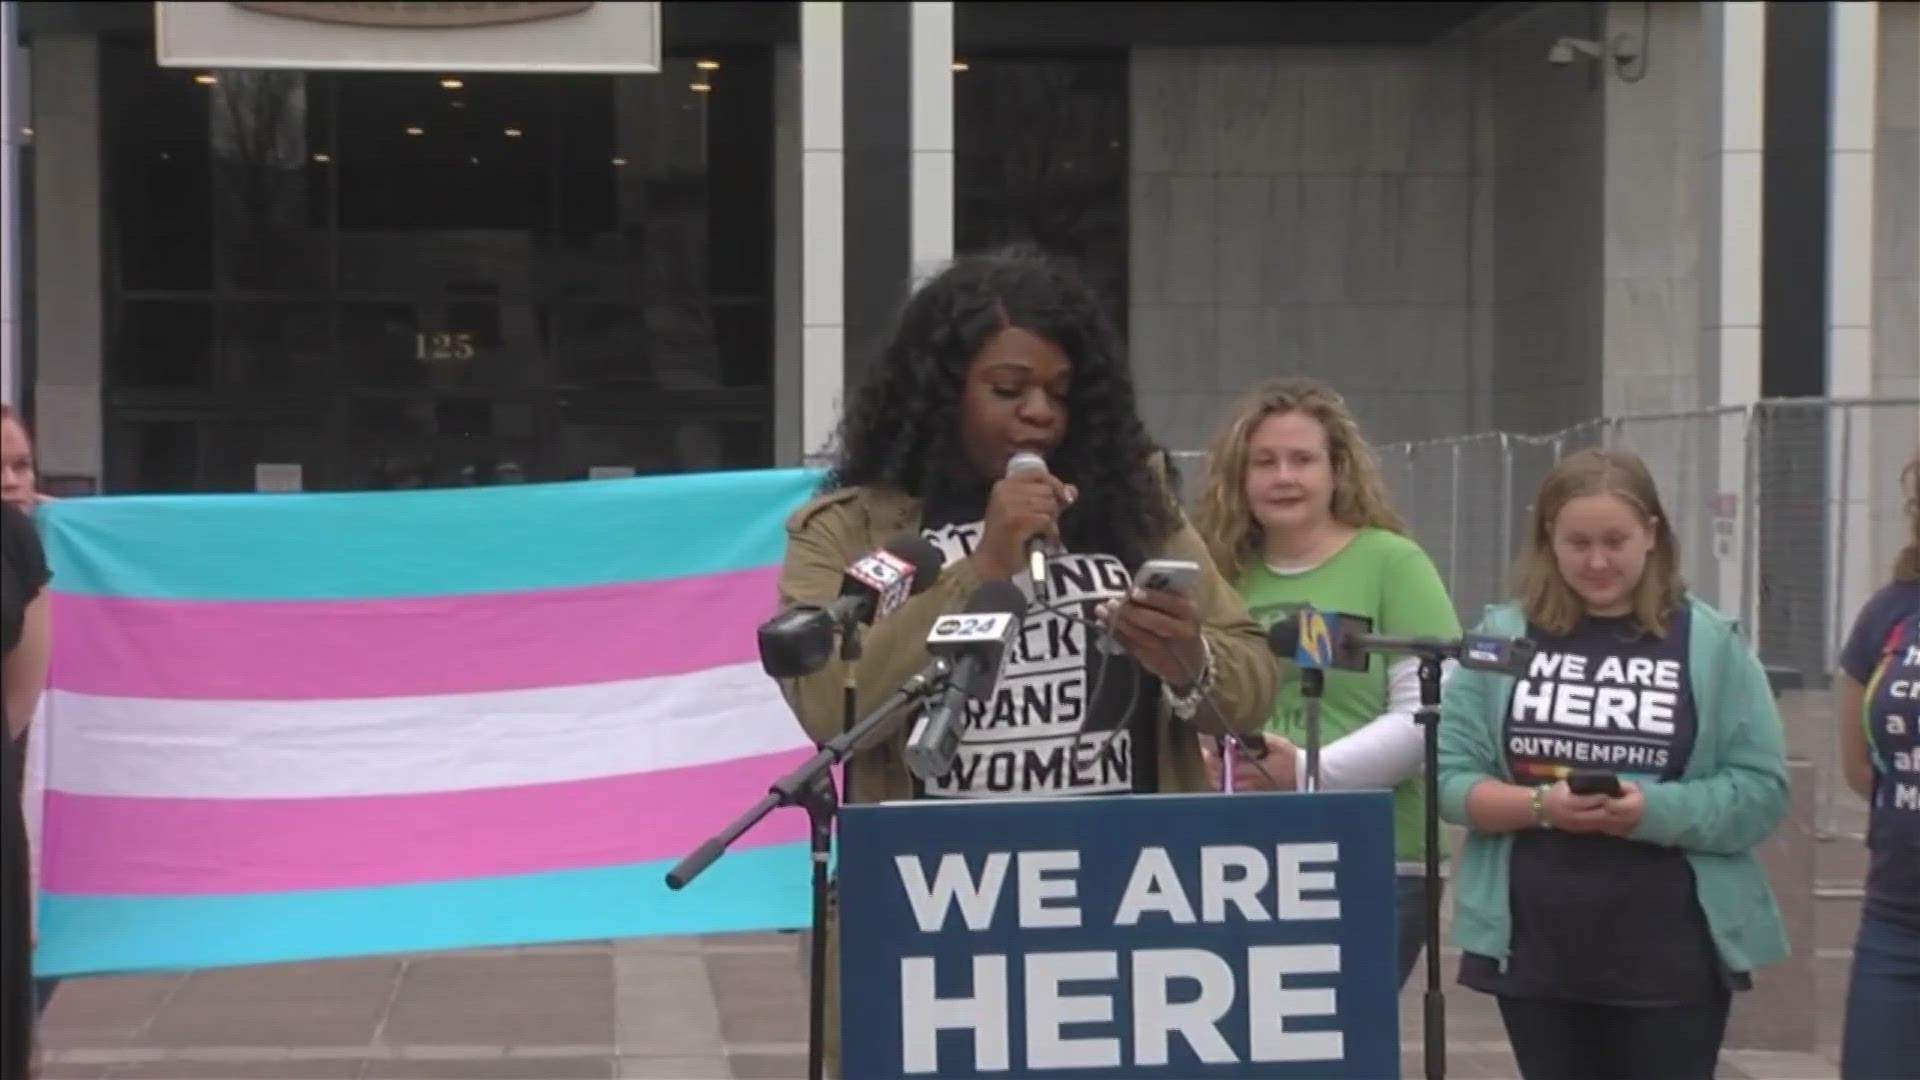 Members of Out Memphis said a bill preventing gender-affirming care in Tennessee is an attack on the LGBTQ community.